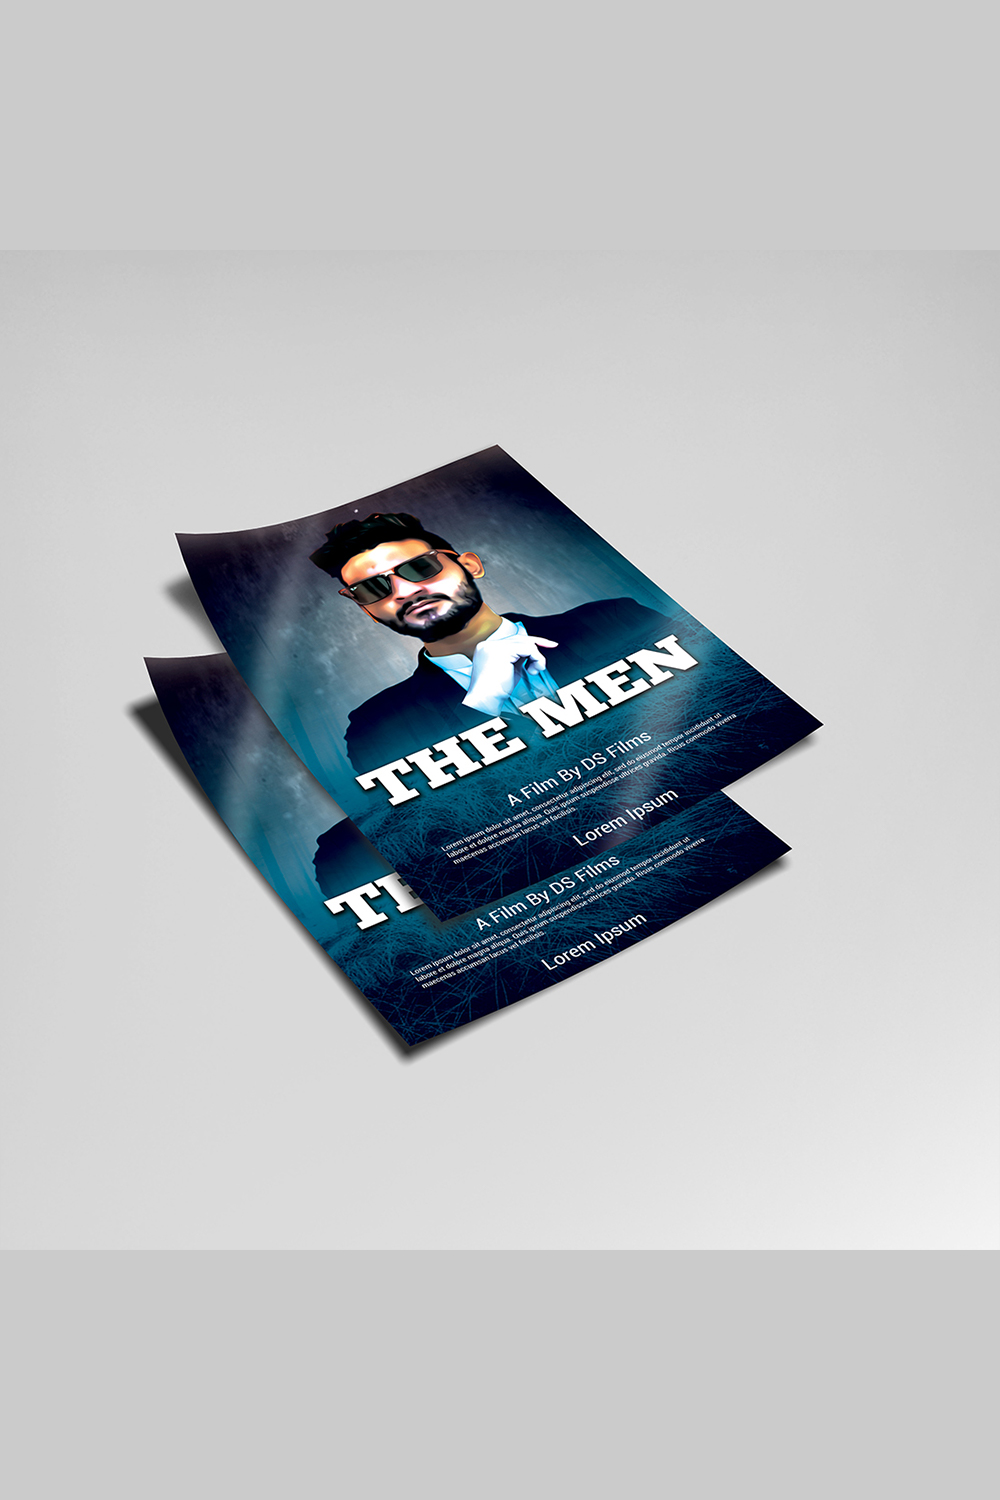 The Men Movie poster design pinterest preview image.